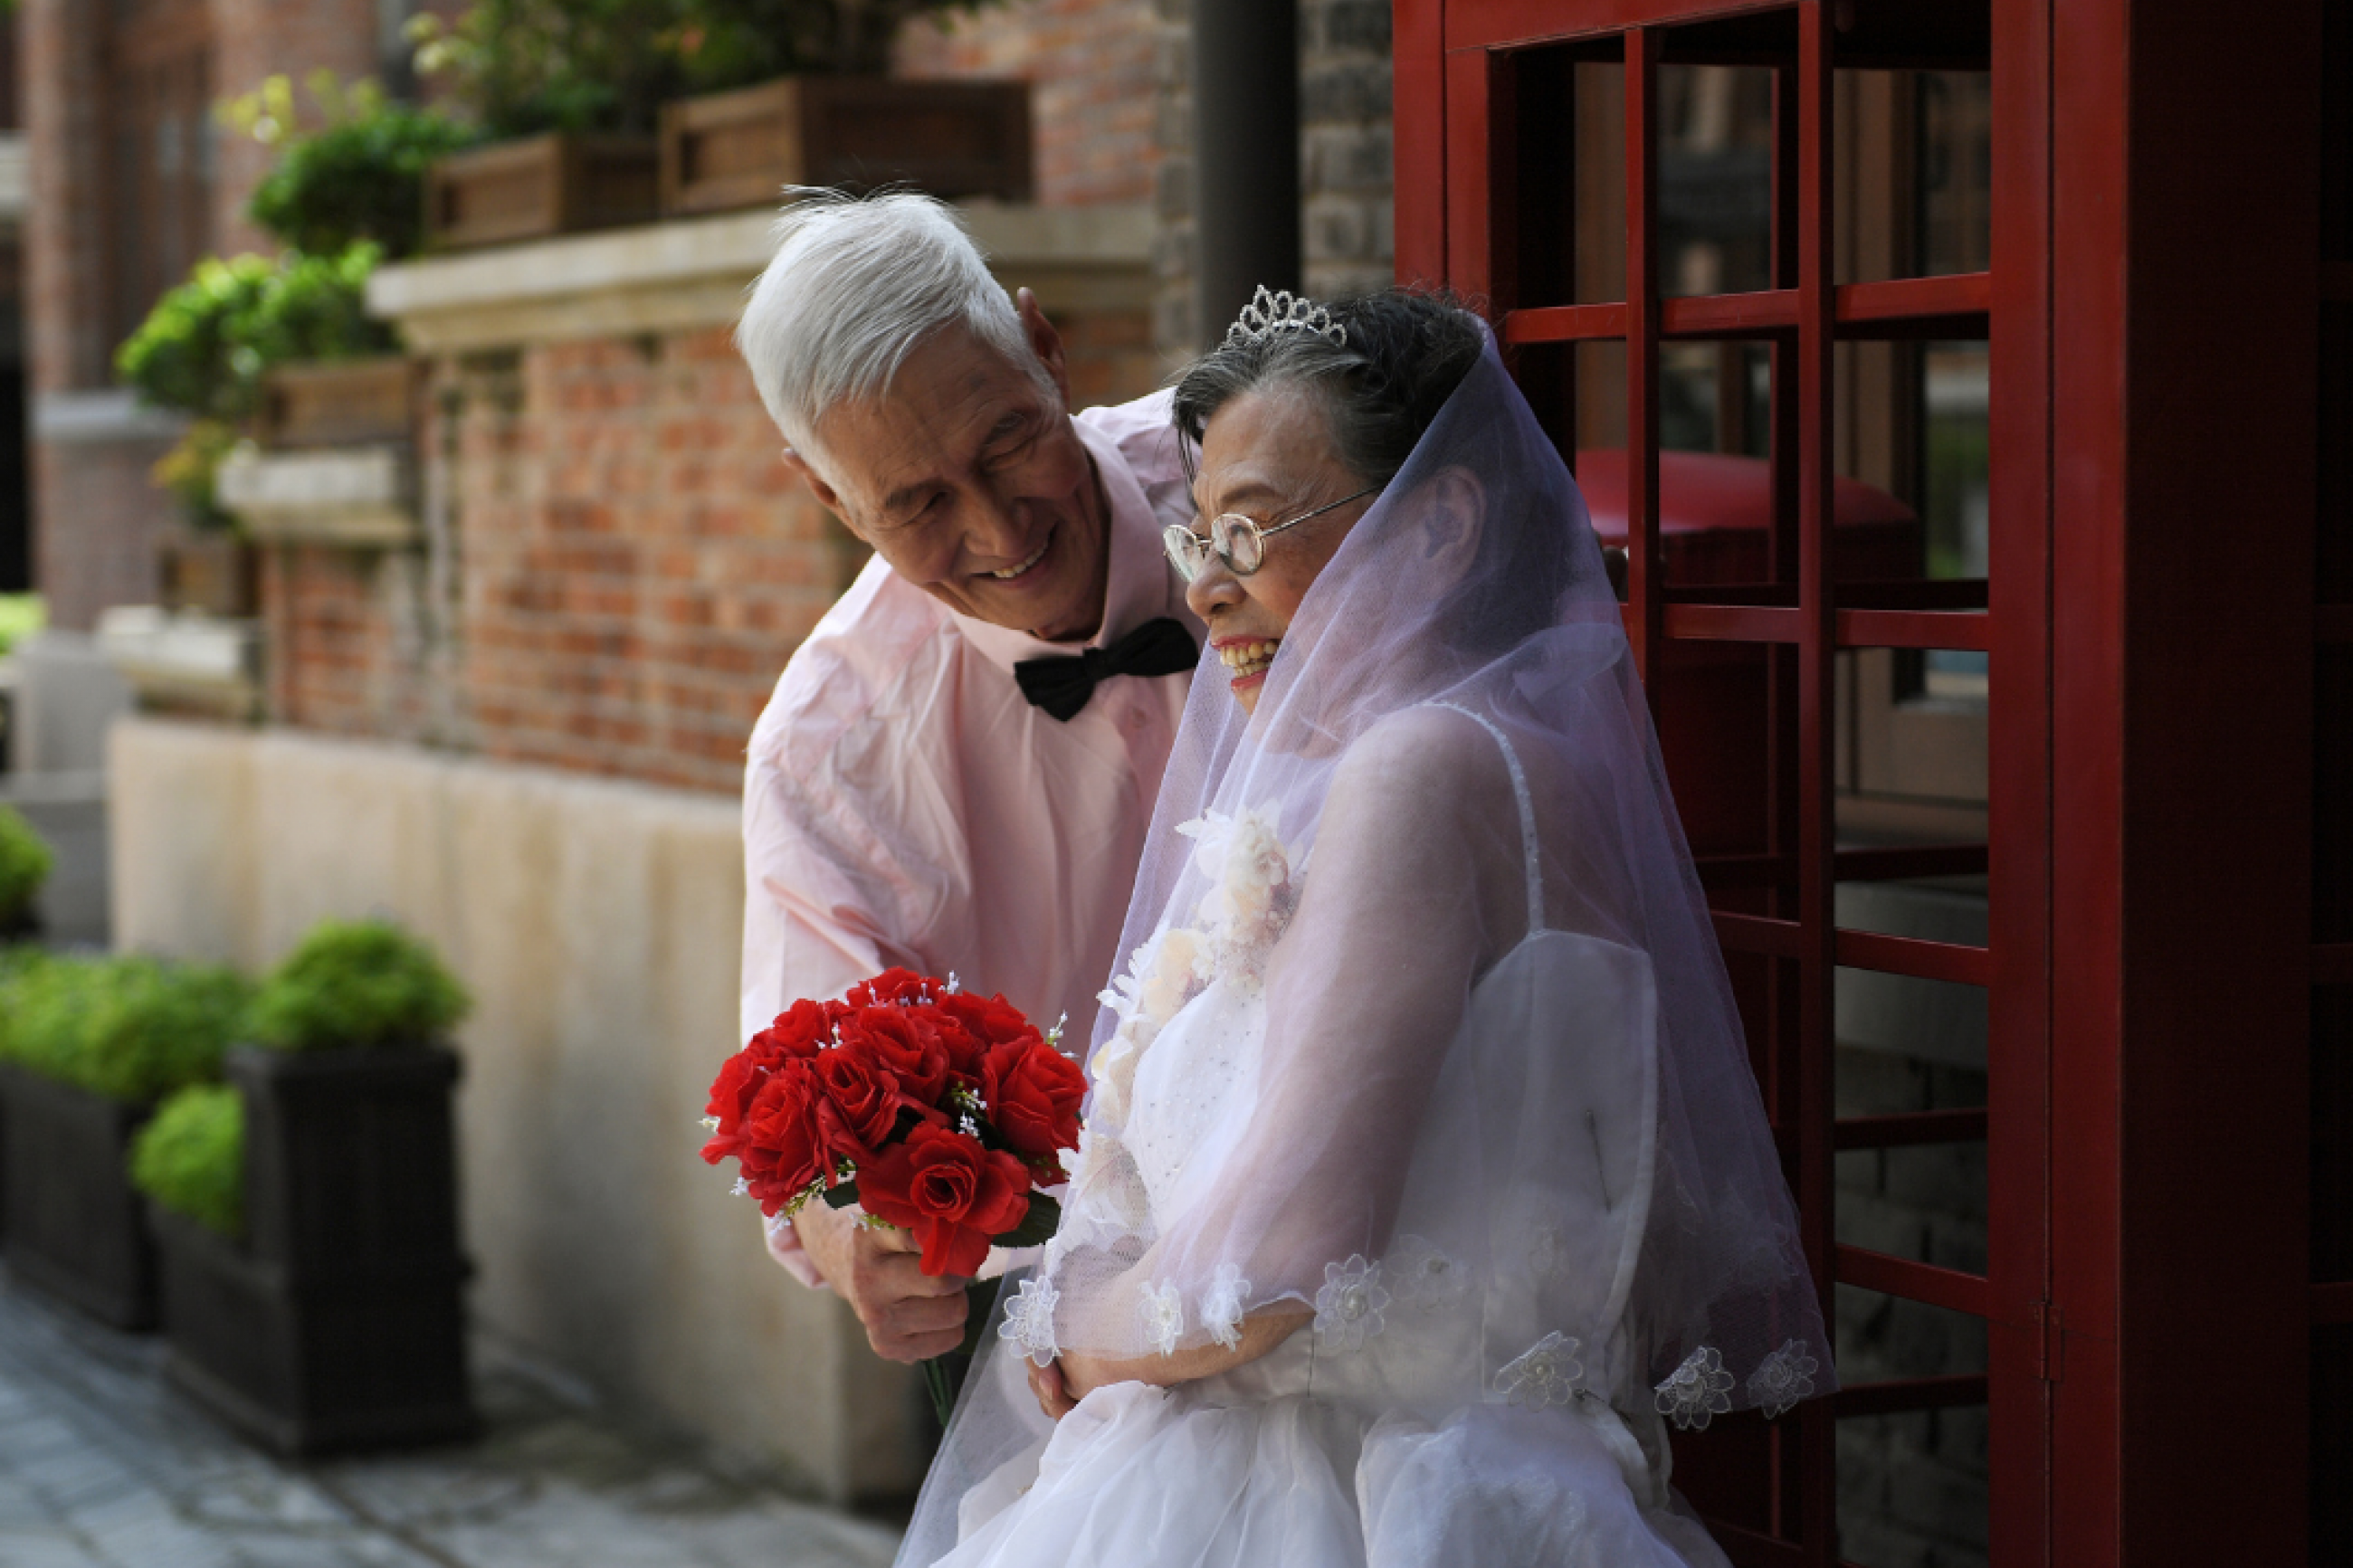 Chen Guozhi, 85, and his wife Chen Suzhen, 82, pose during a photo shoot to recreate wedding photos for elderly couples, who have been married for more than 50 years, Tianjin, China, August 16, 2018